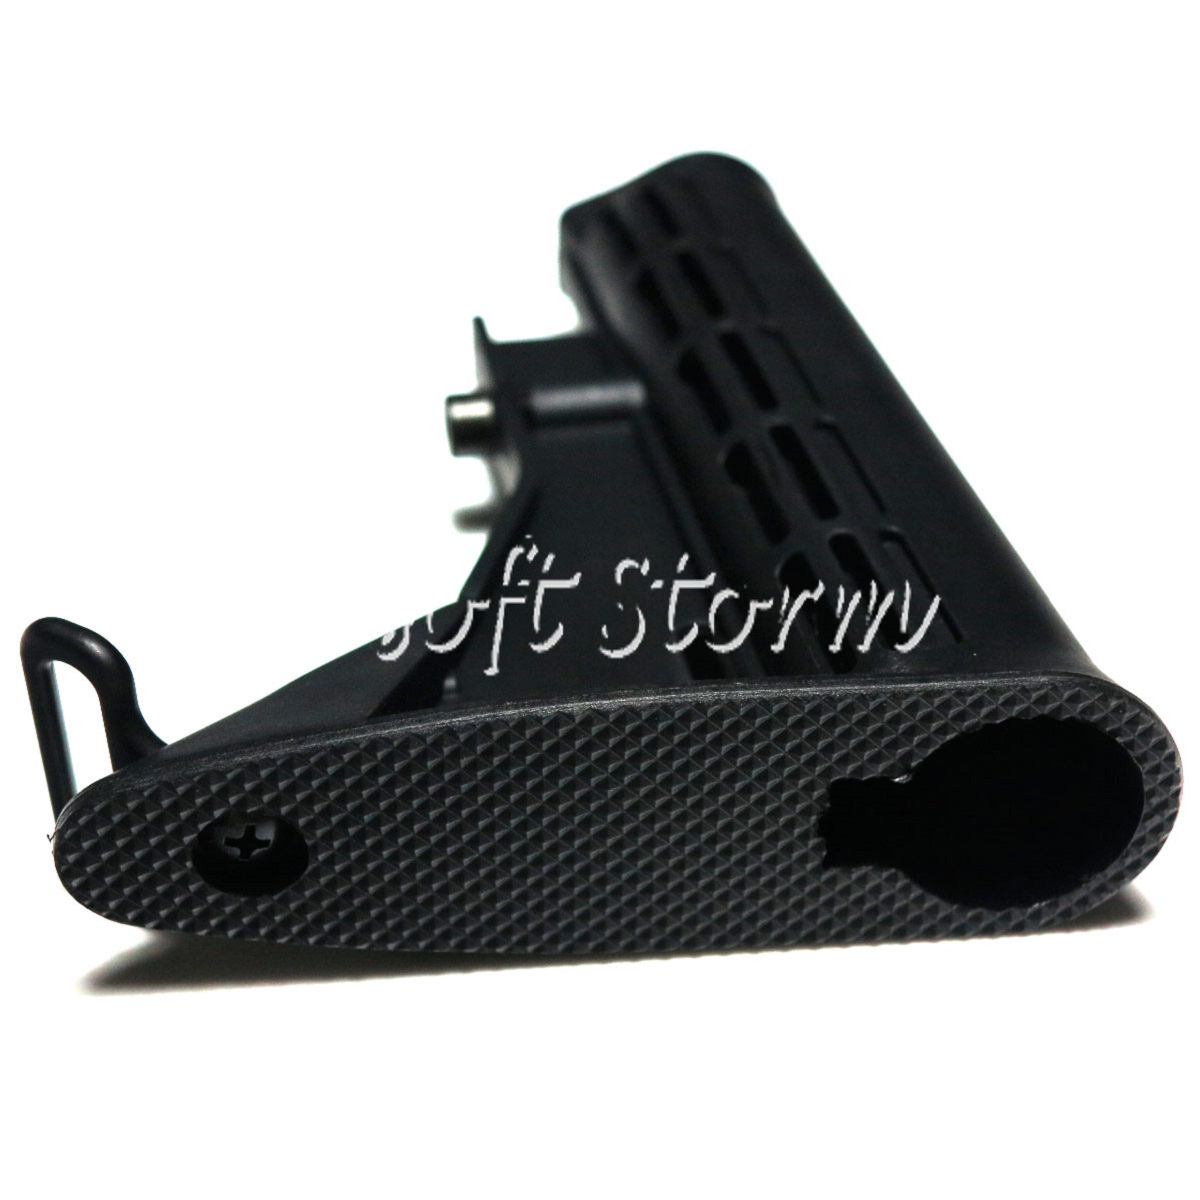 Airsoft Tactical Gear E&C 6 Position Sliding Stock for HK416/M4/M16 AEG